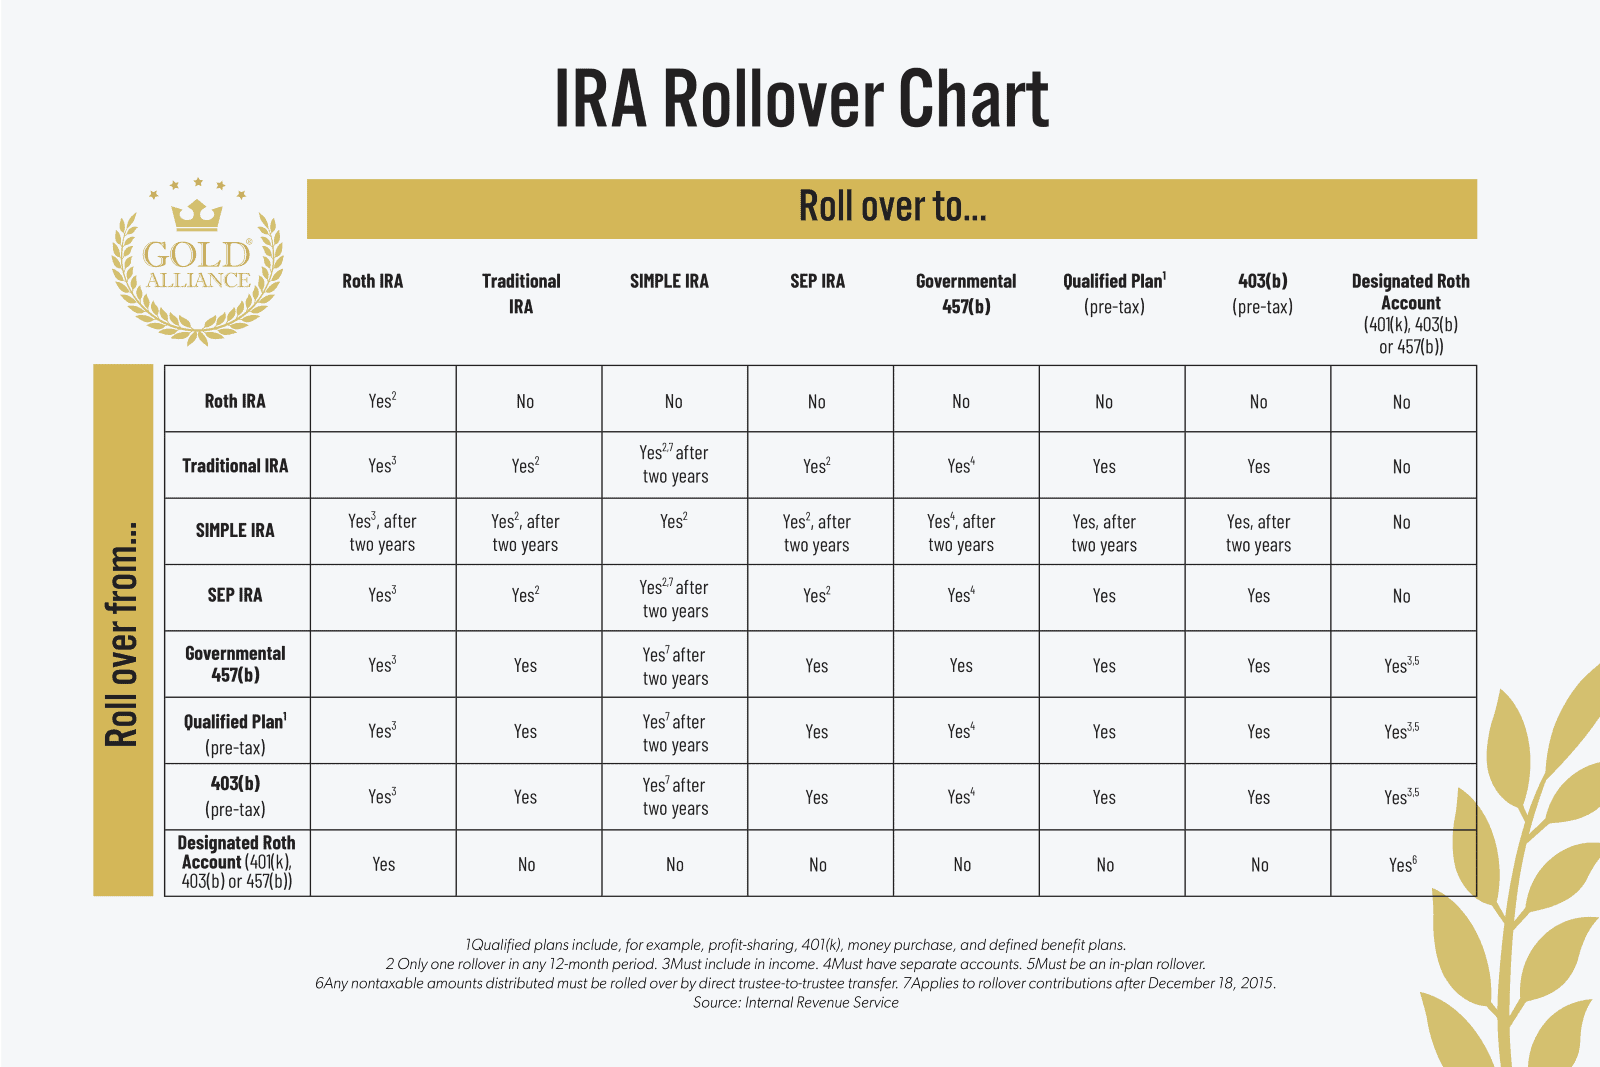 The Only Guide for Making Informed Rollover Decisions